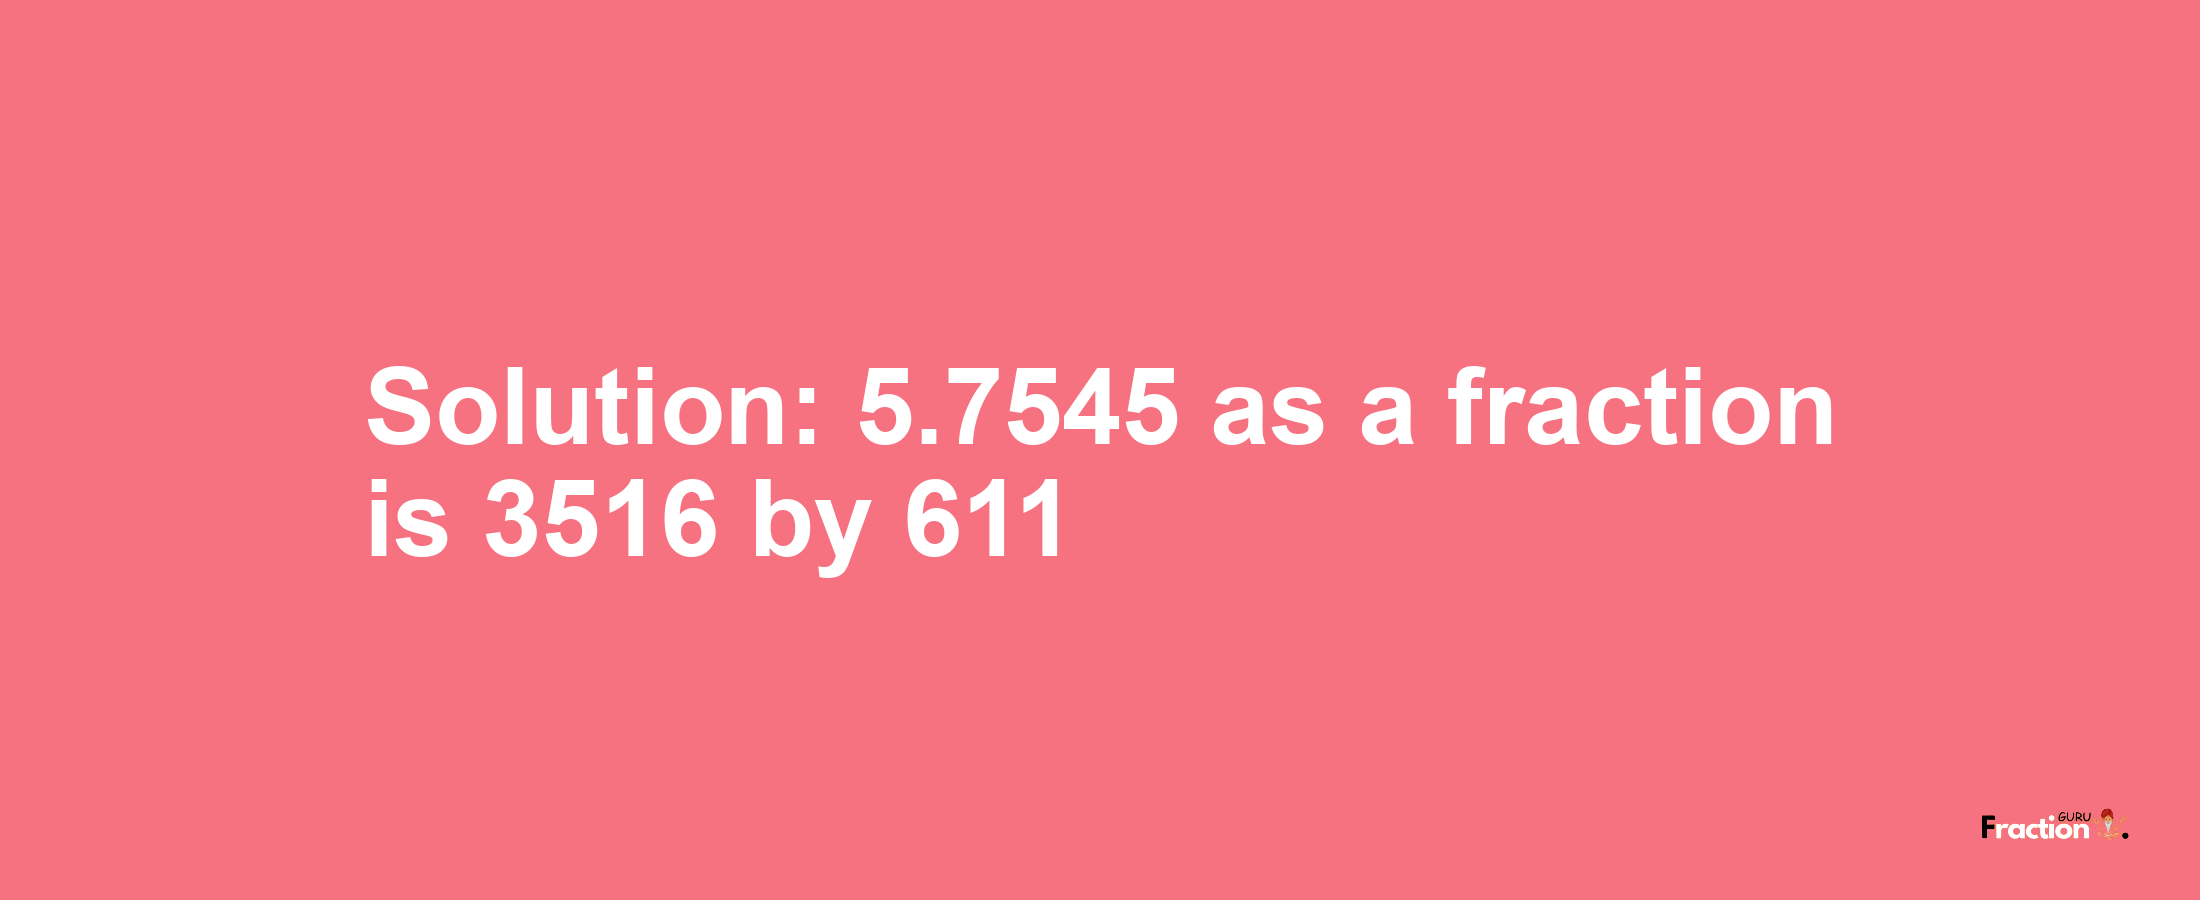 Solution:5.7545 as a fraction is 3516/611